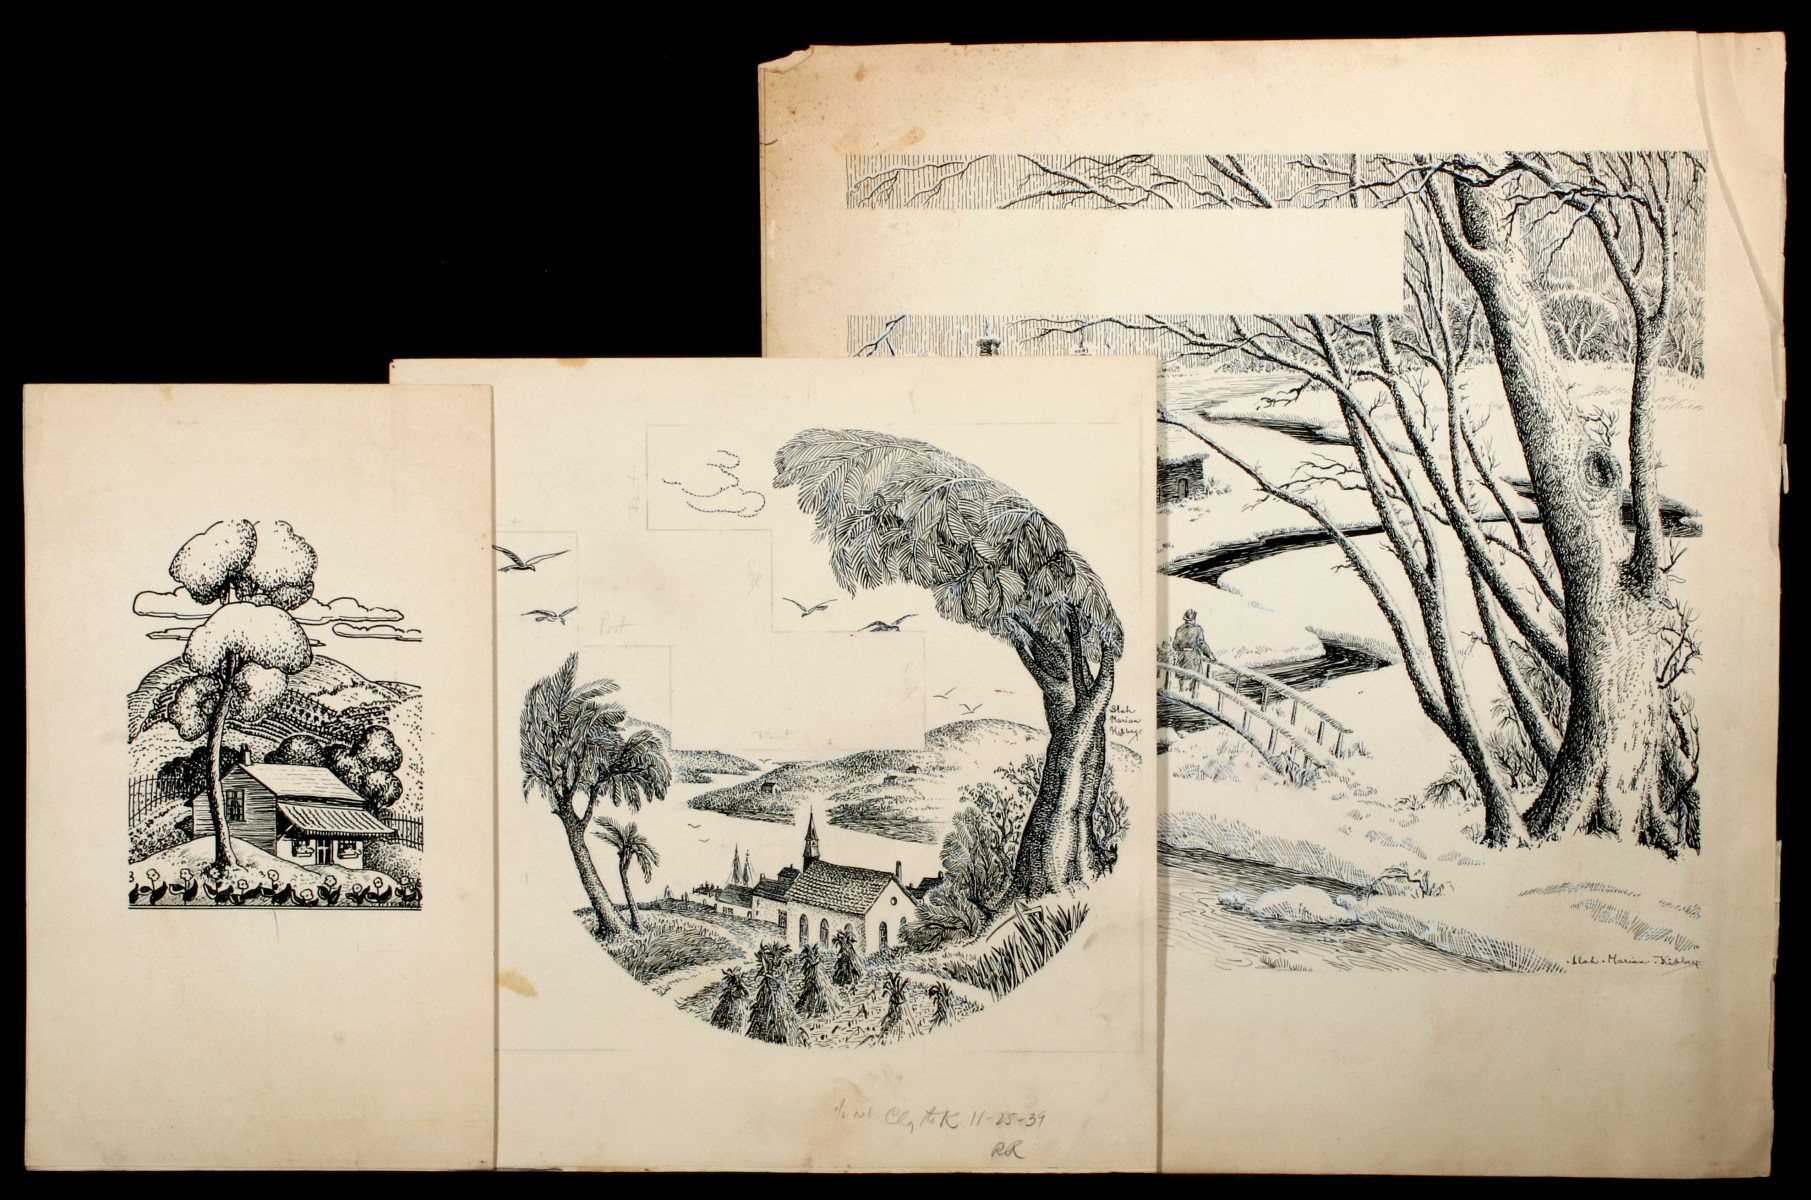 PEN AND INK SKETCHES BY ILAH KIBBEY (1888 - 1958)